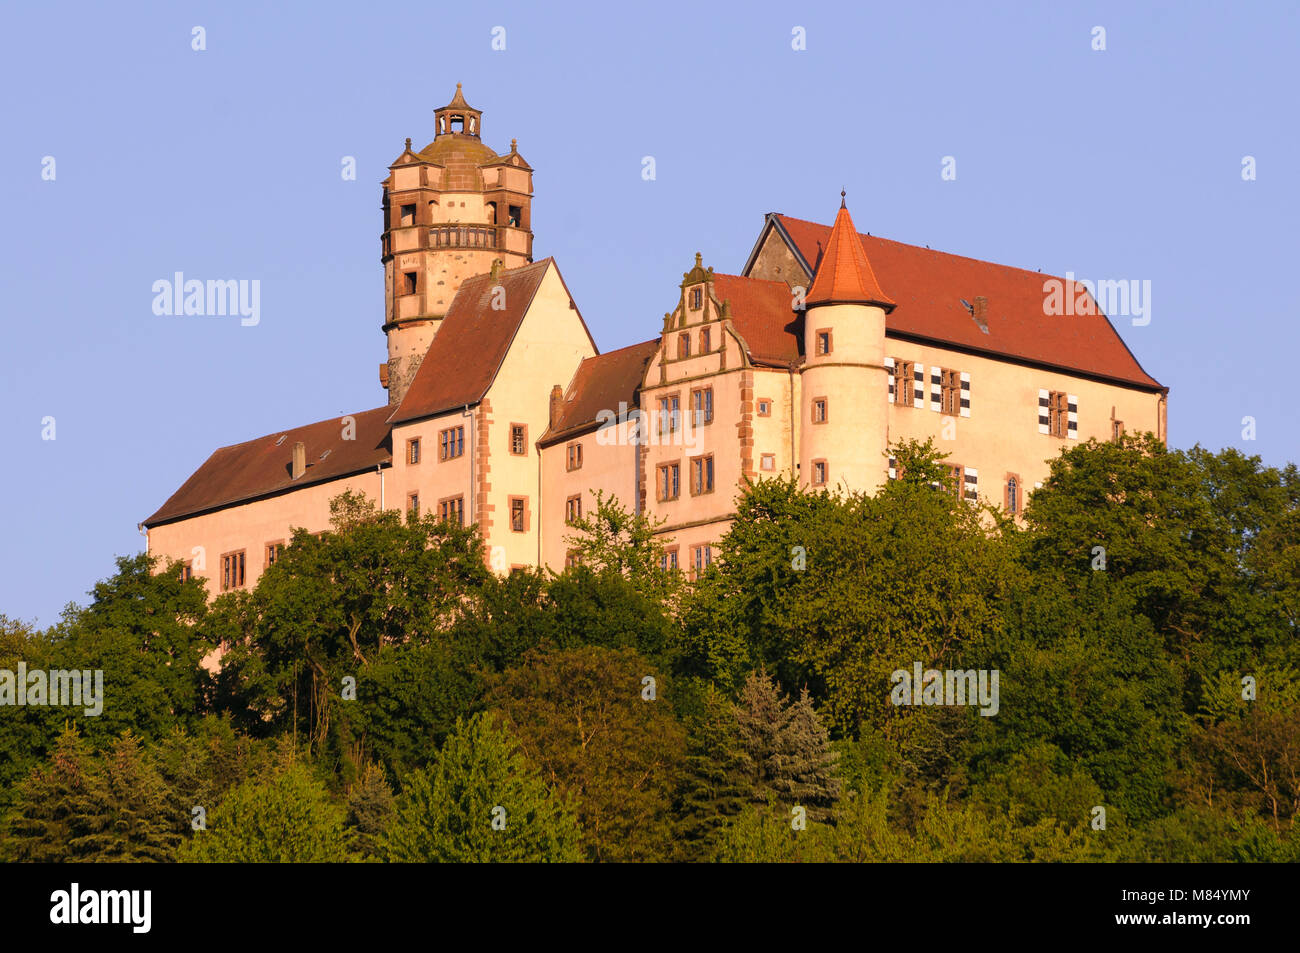 Ronneburg, Hesse, Germany, Europe Banque D'Images